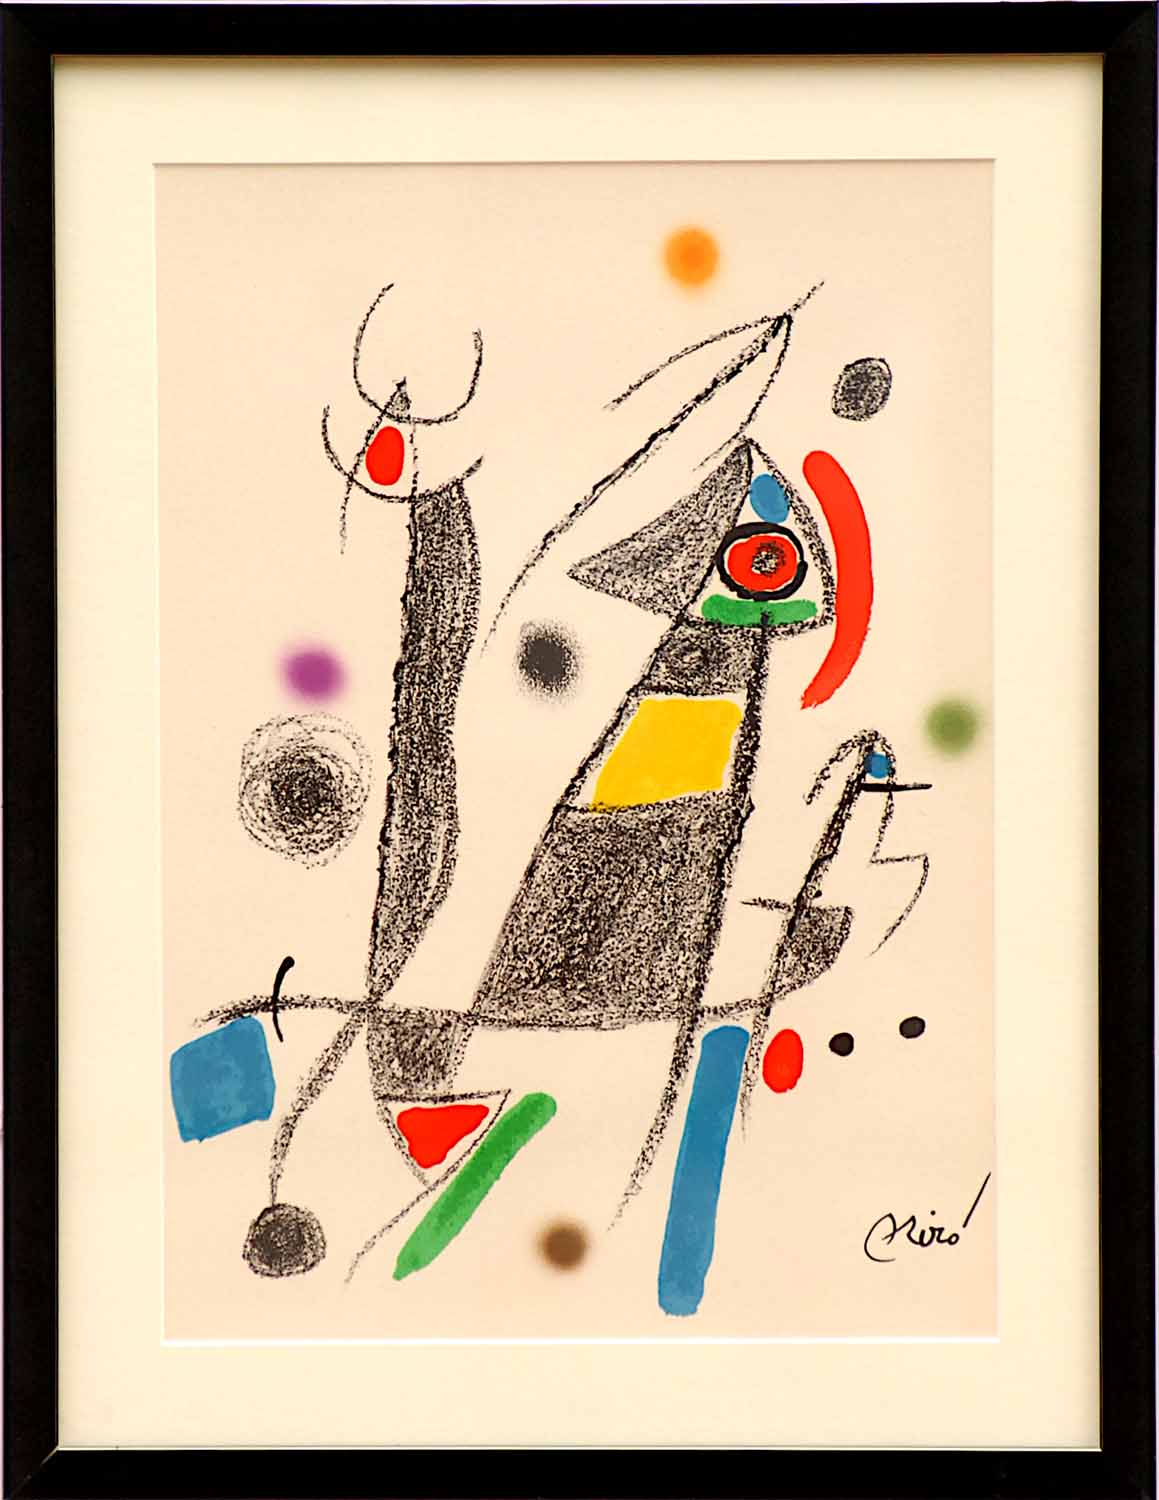 JOAN MIRO, 'Untitled Maravillas suite', lithograph, signed in the plate, 1975, 48cm x 34cm, framed.